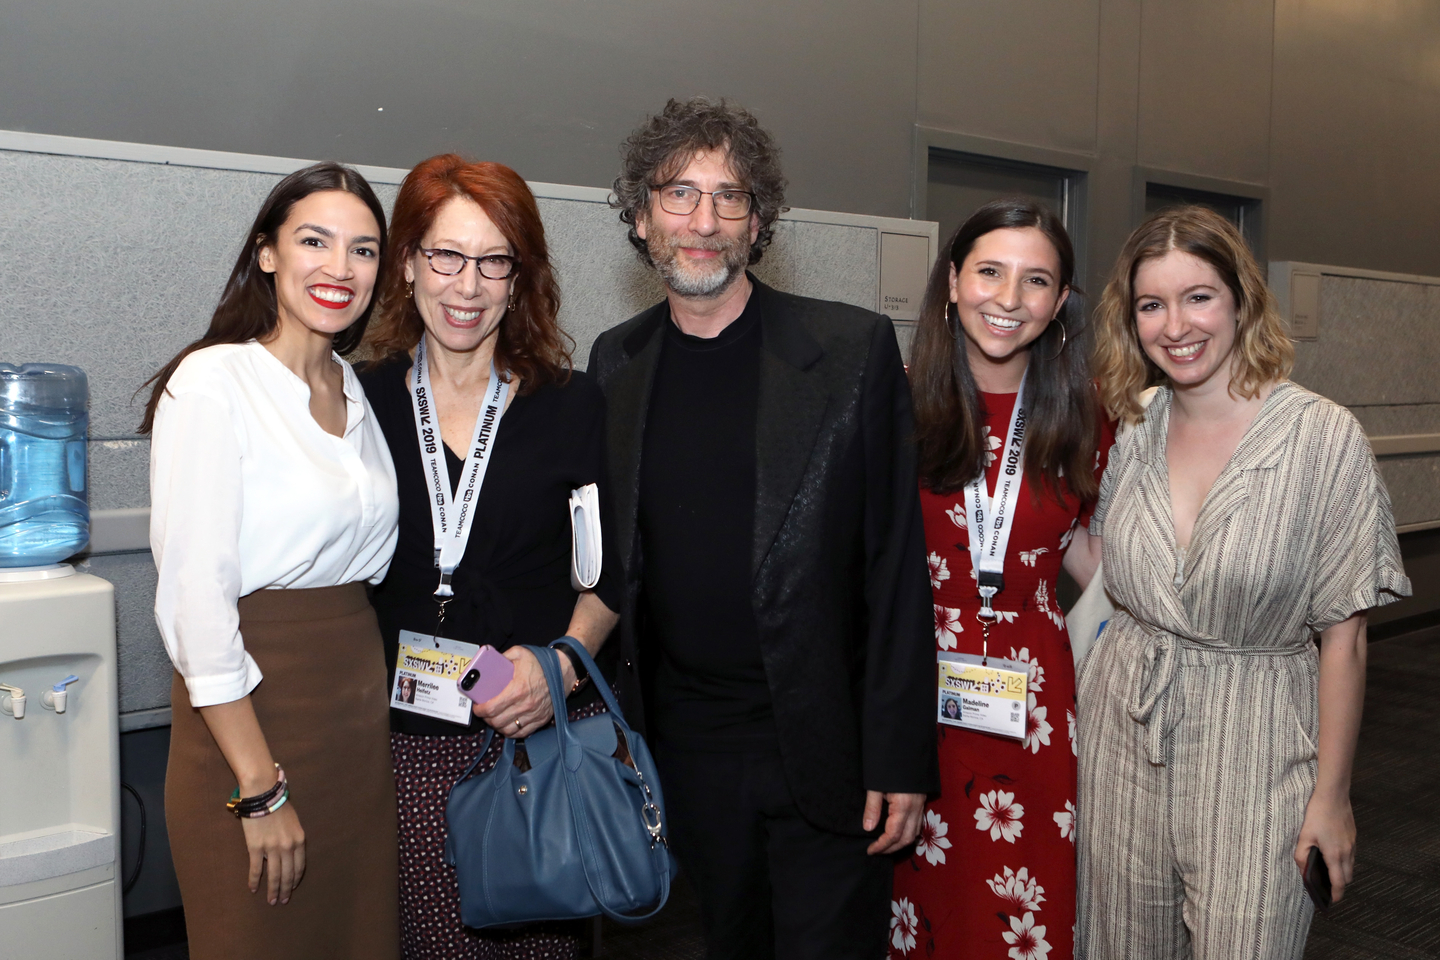 (L-R) Alexandria Ocasio-Cortez, Merrilee Heifetz, Neil Gaiman, Maddy Gaiman, and guest attended the Featured Session: Alexandria Ocasio-Cortez and the New Left – Photo by Samantha Burkardt/Getty Images for SXSW